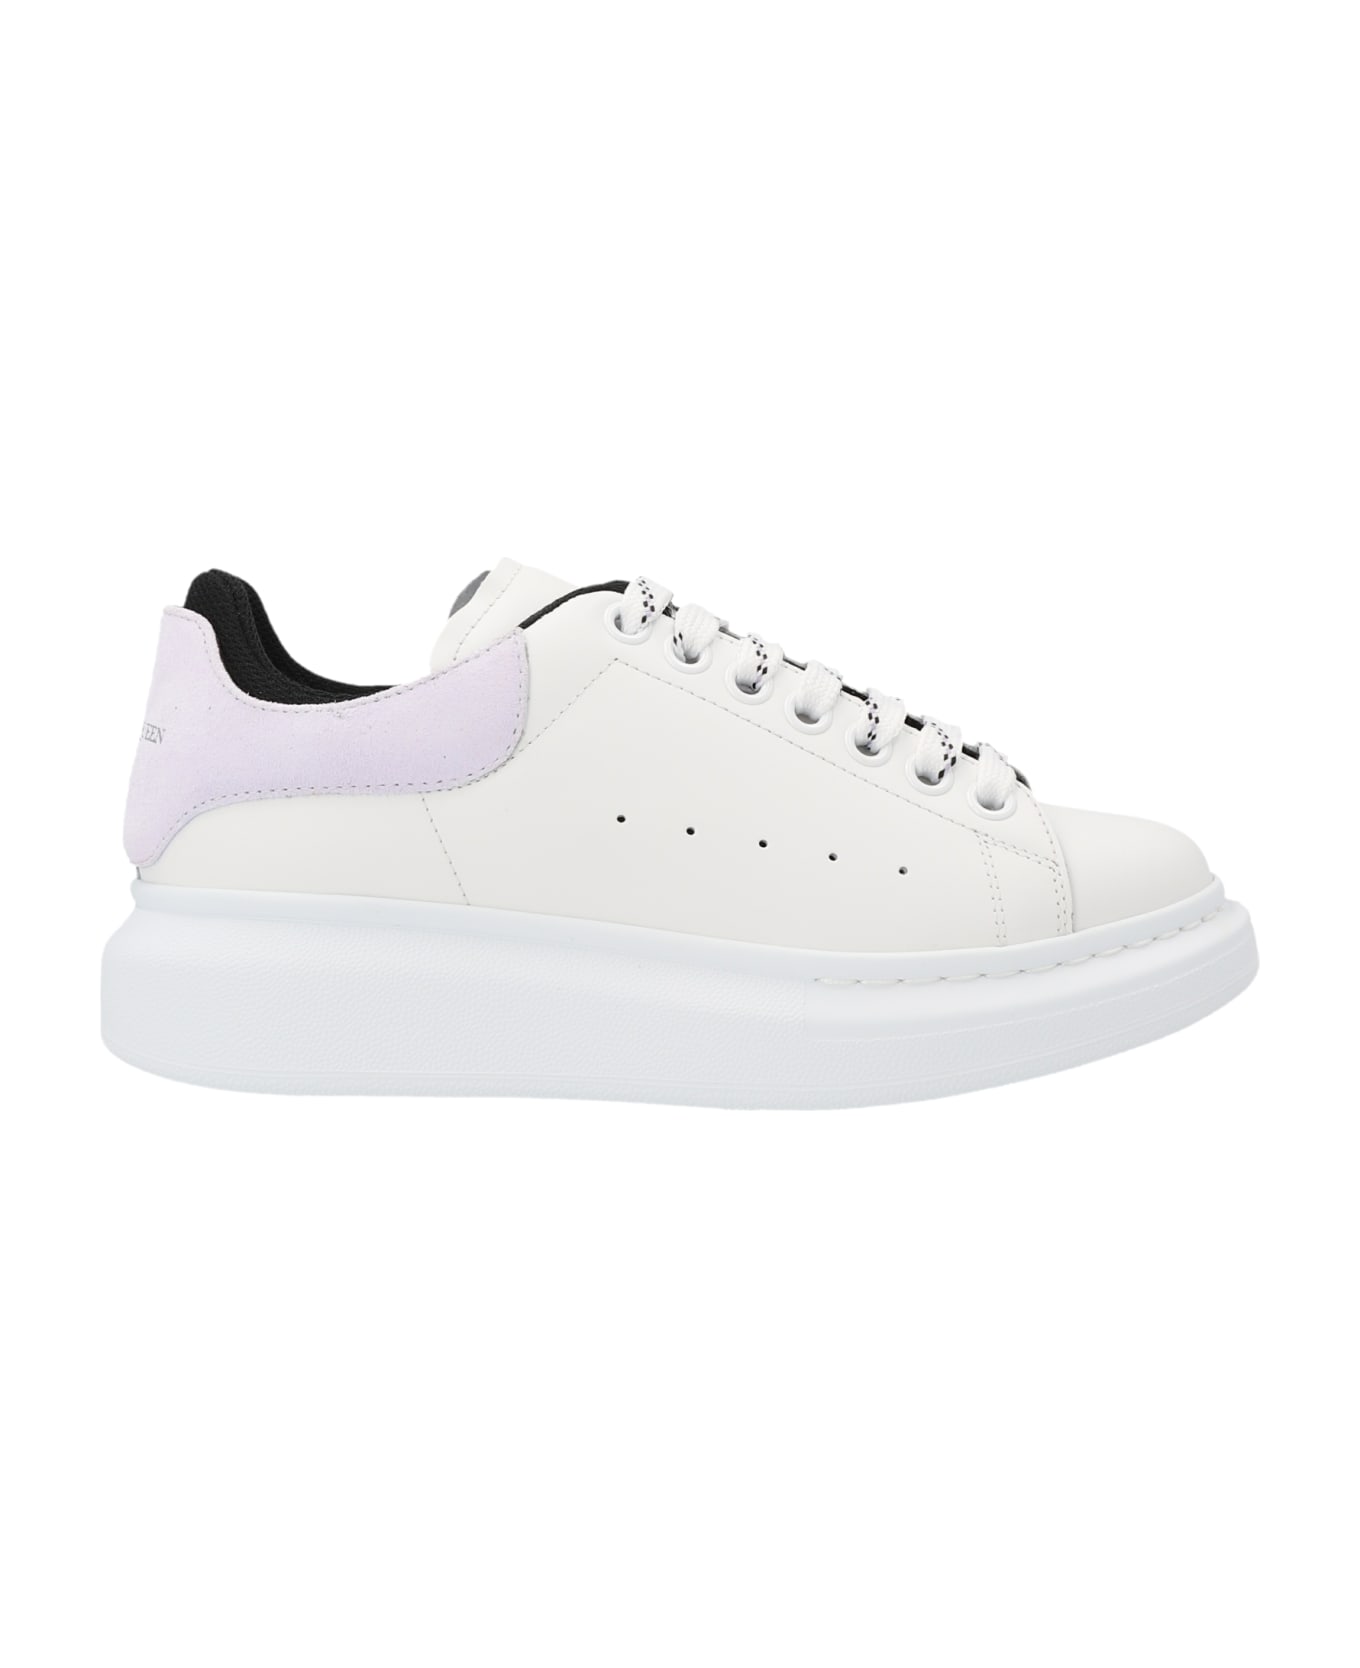 Alexander McQueen White, Black And Lilac Oversize Sneakers - Bianco ウェッジシューズ